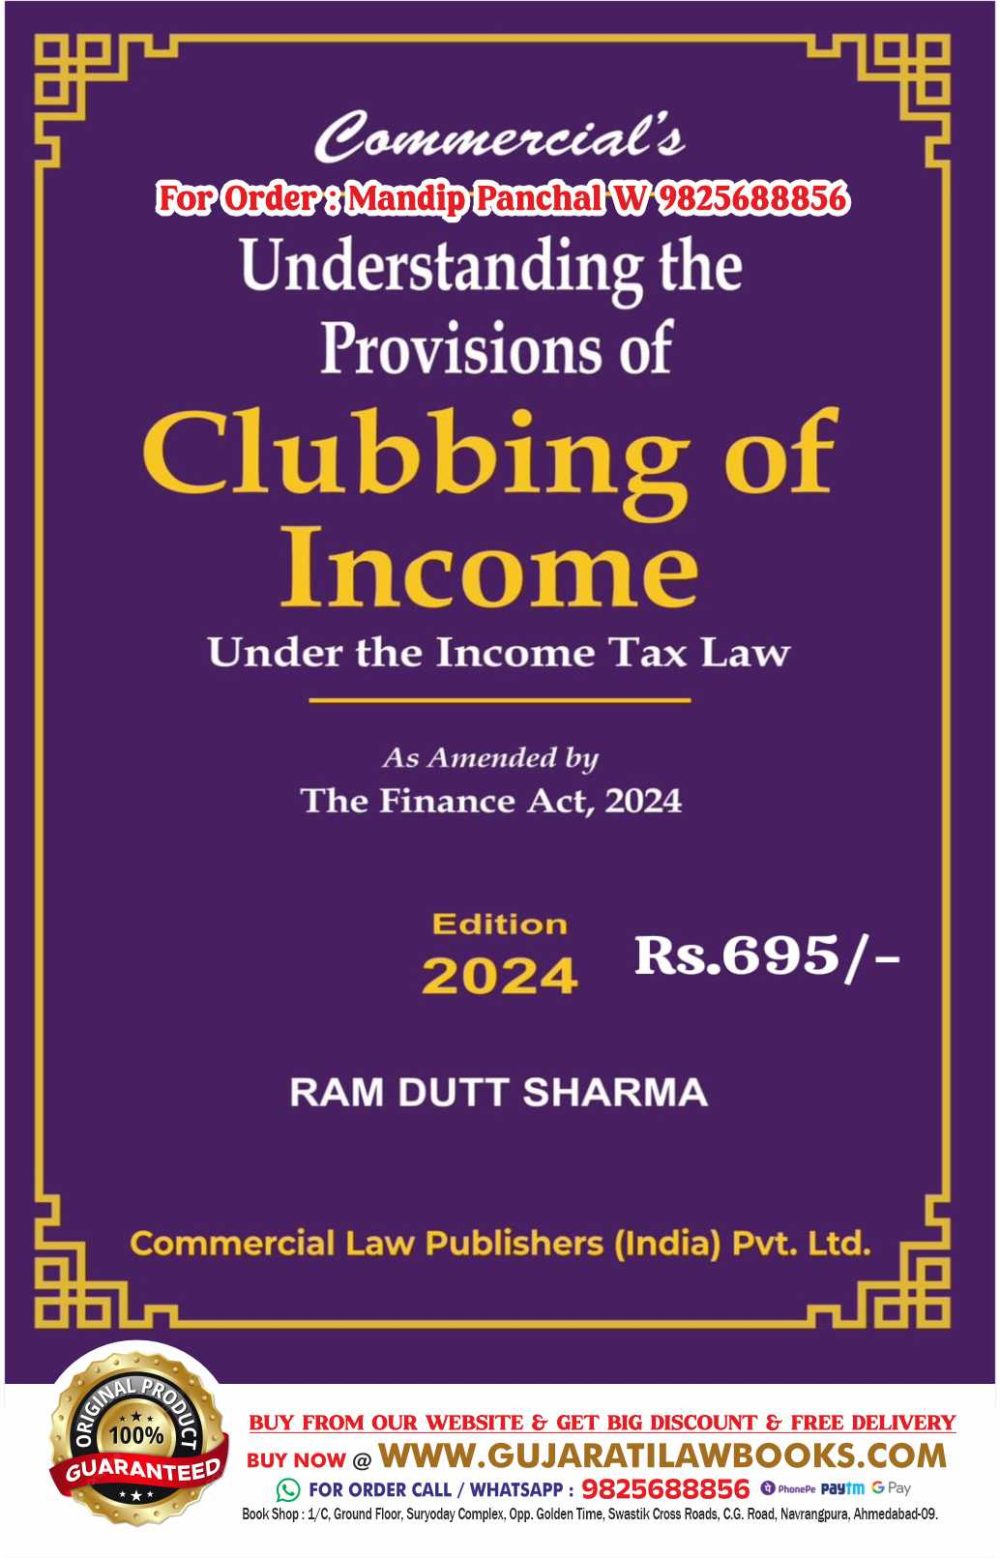 Understanding the Providions of CLUBBING OF INCOME - by Ram Dutt Sharma - Latest 2024 Edition Commercial